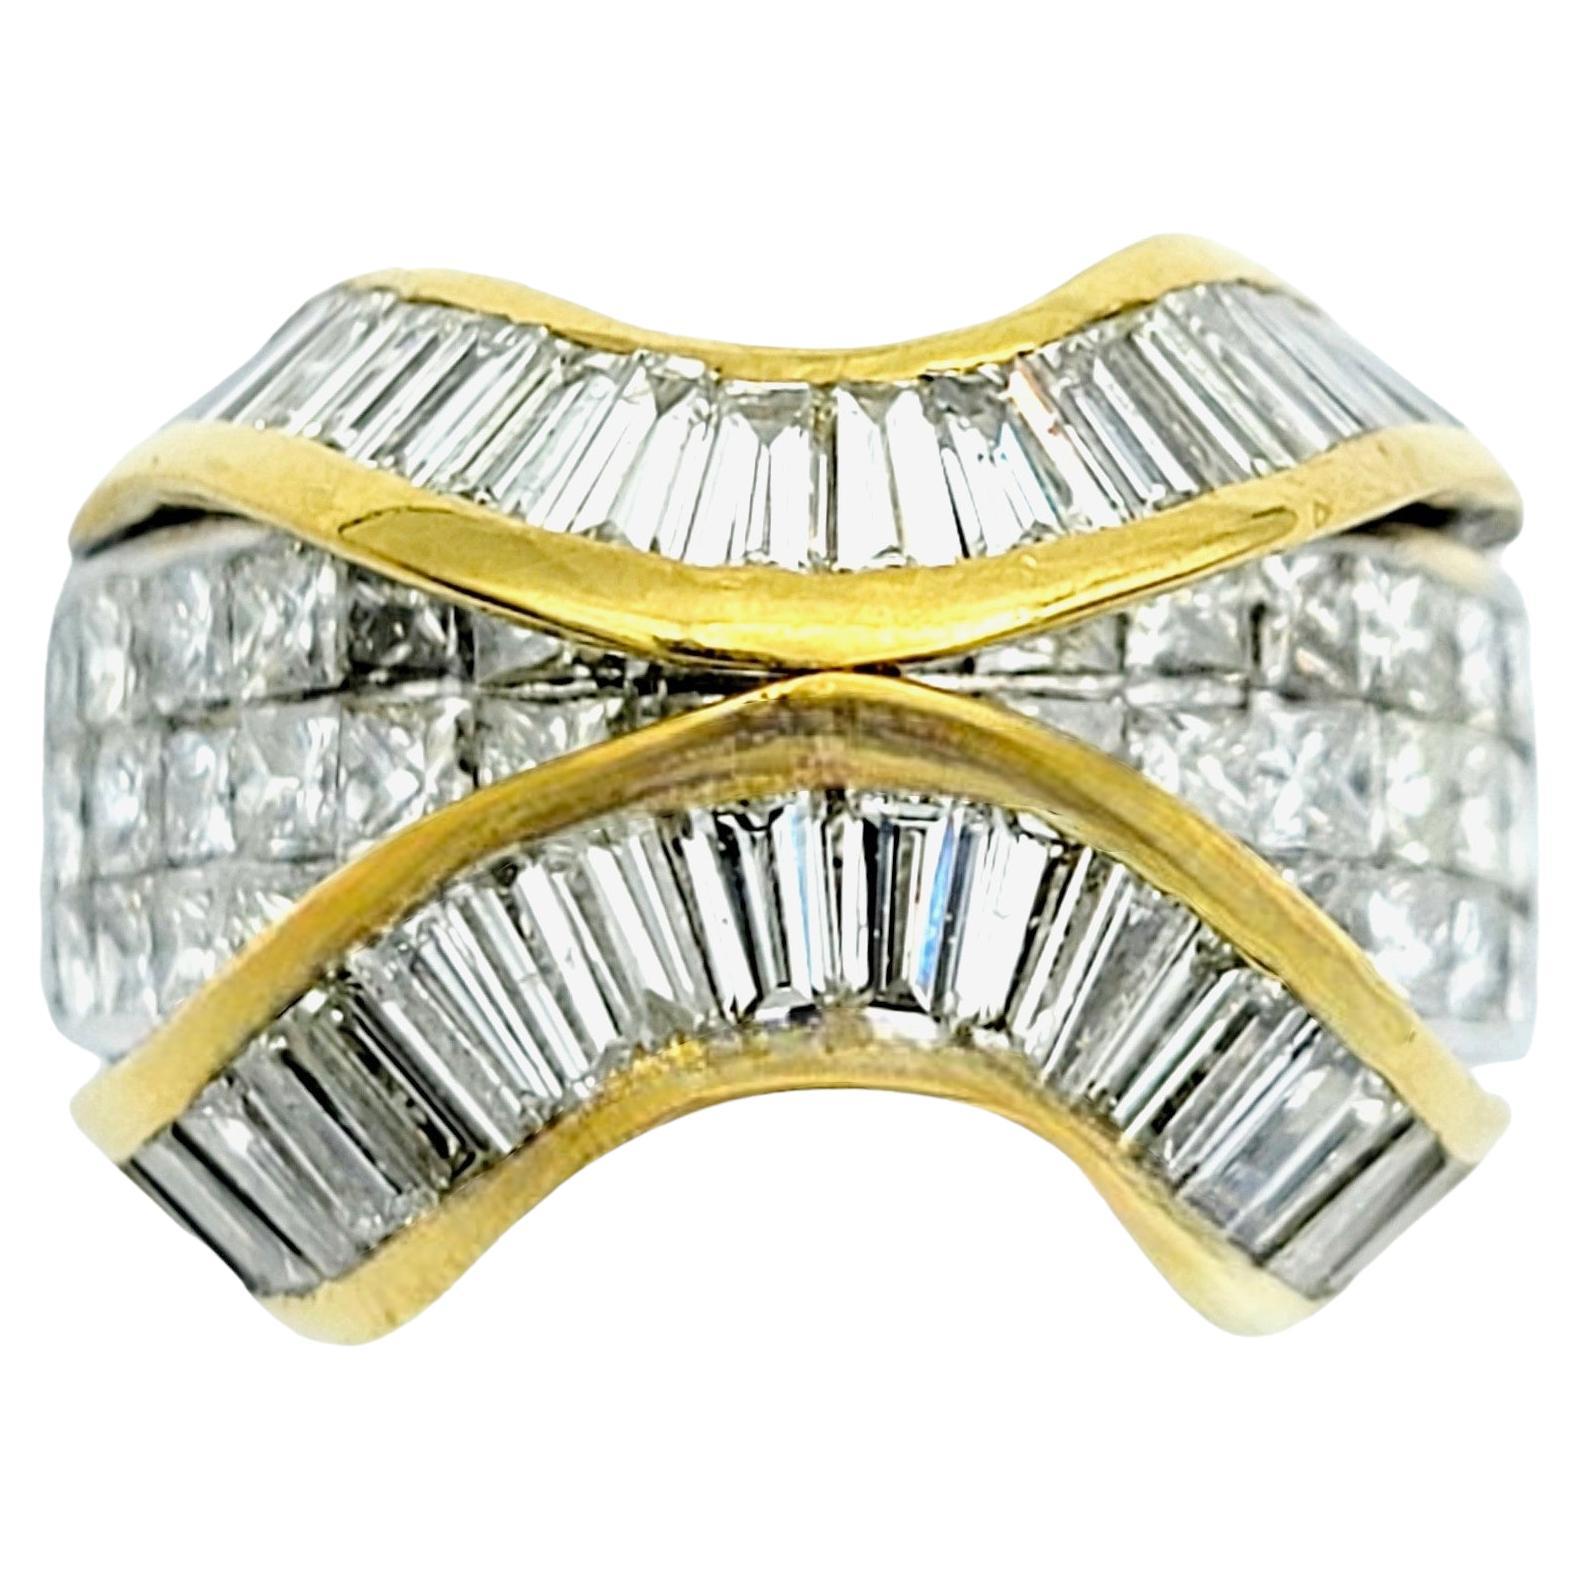 Multi-Row Baguette and Princess Cut Diamond Curved Cocktail Ring in 18K Gold